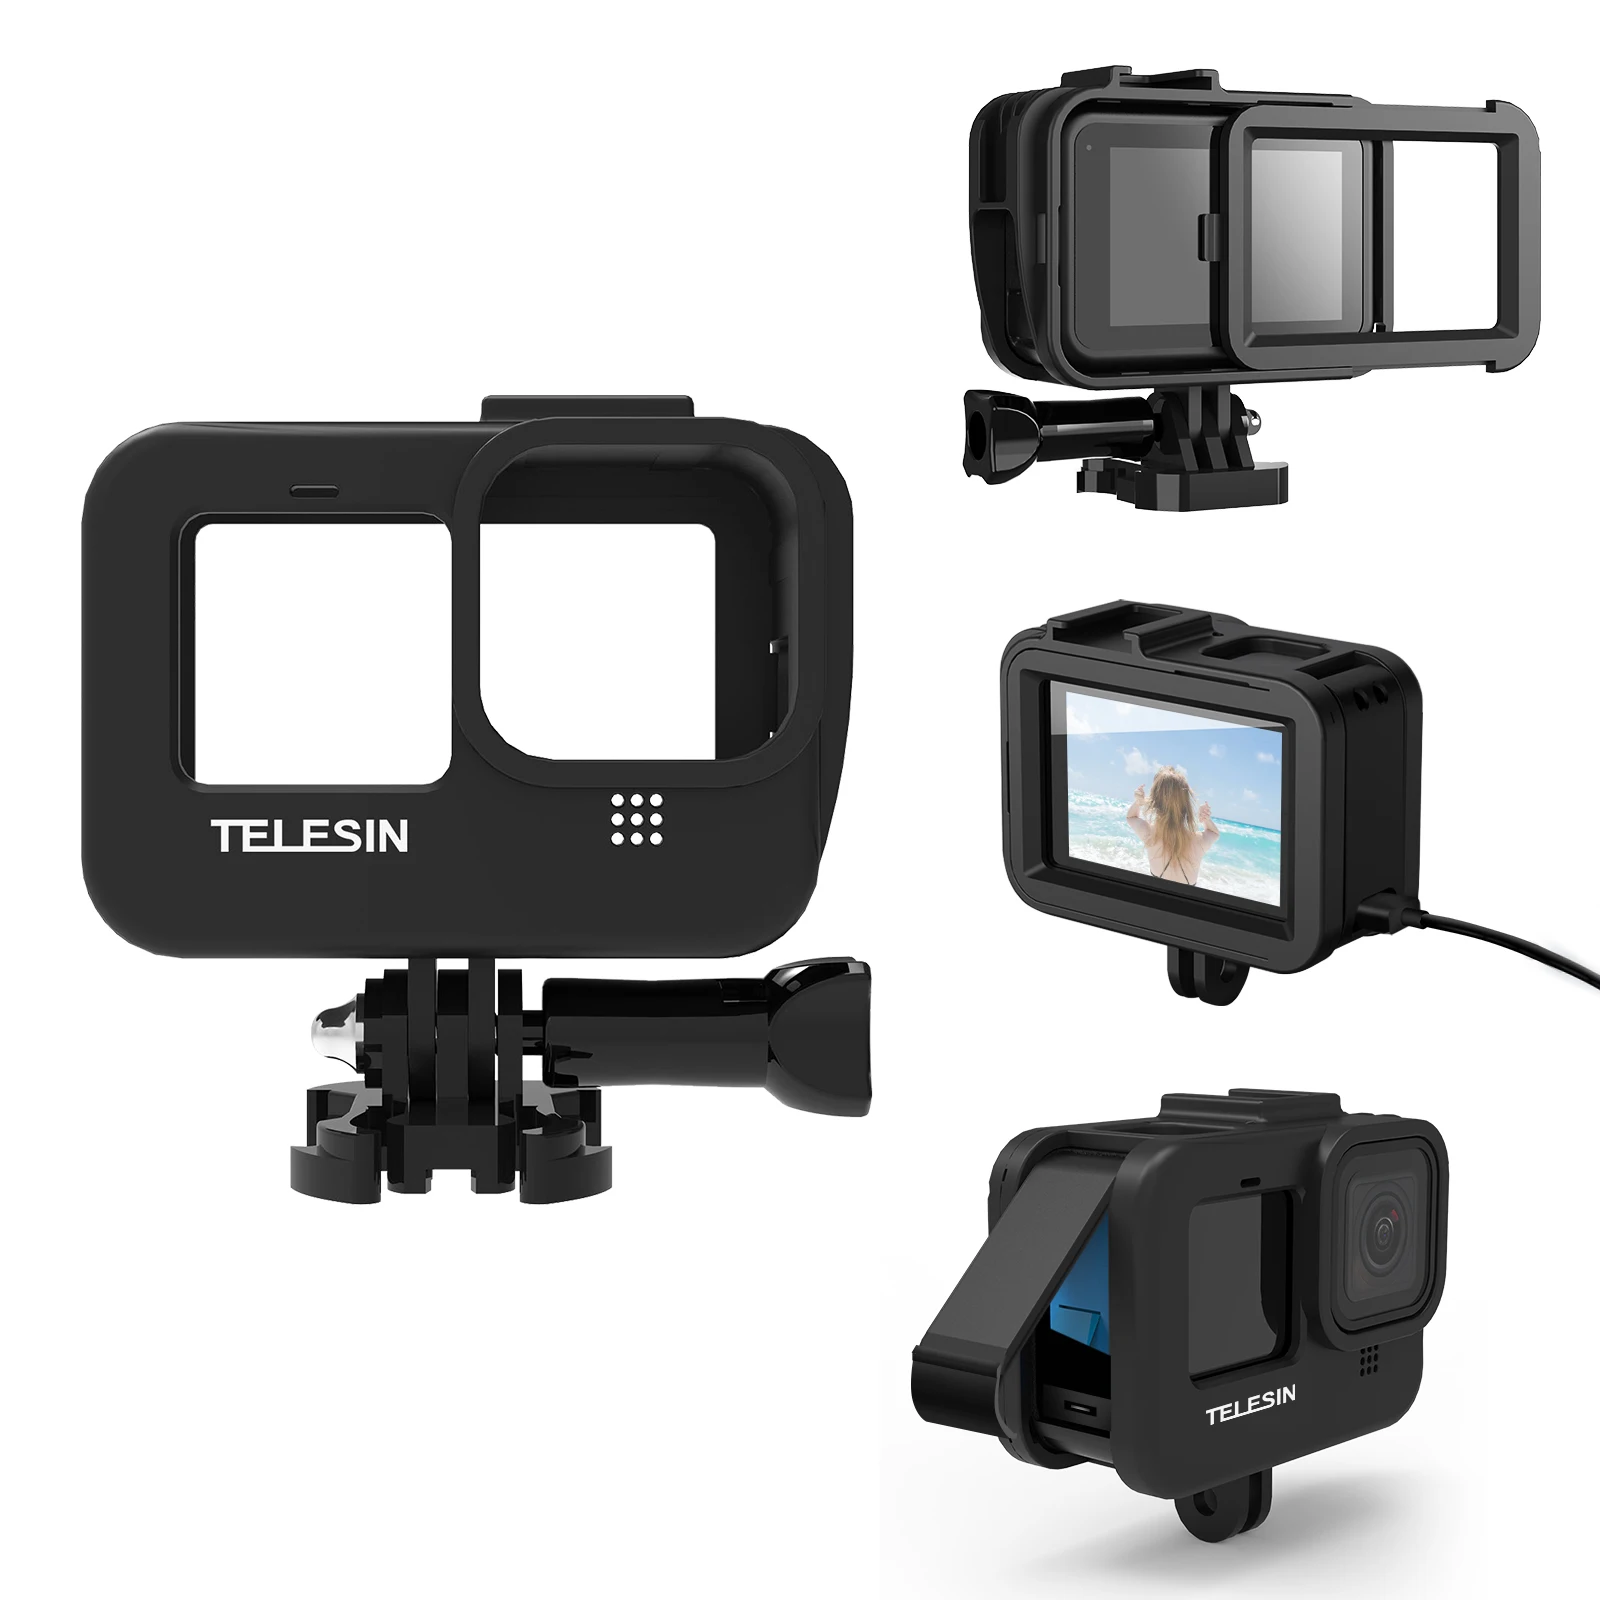 

TELESIN Vlog Frame Bracket Mount Housing Case With Cold Shoe Battery Side Cover Hole For GoPro Hero 9 10 Black Cover Accessories